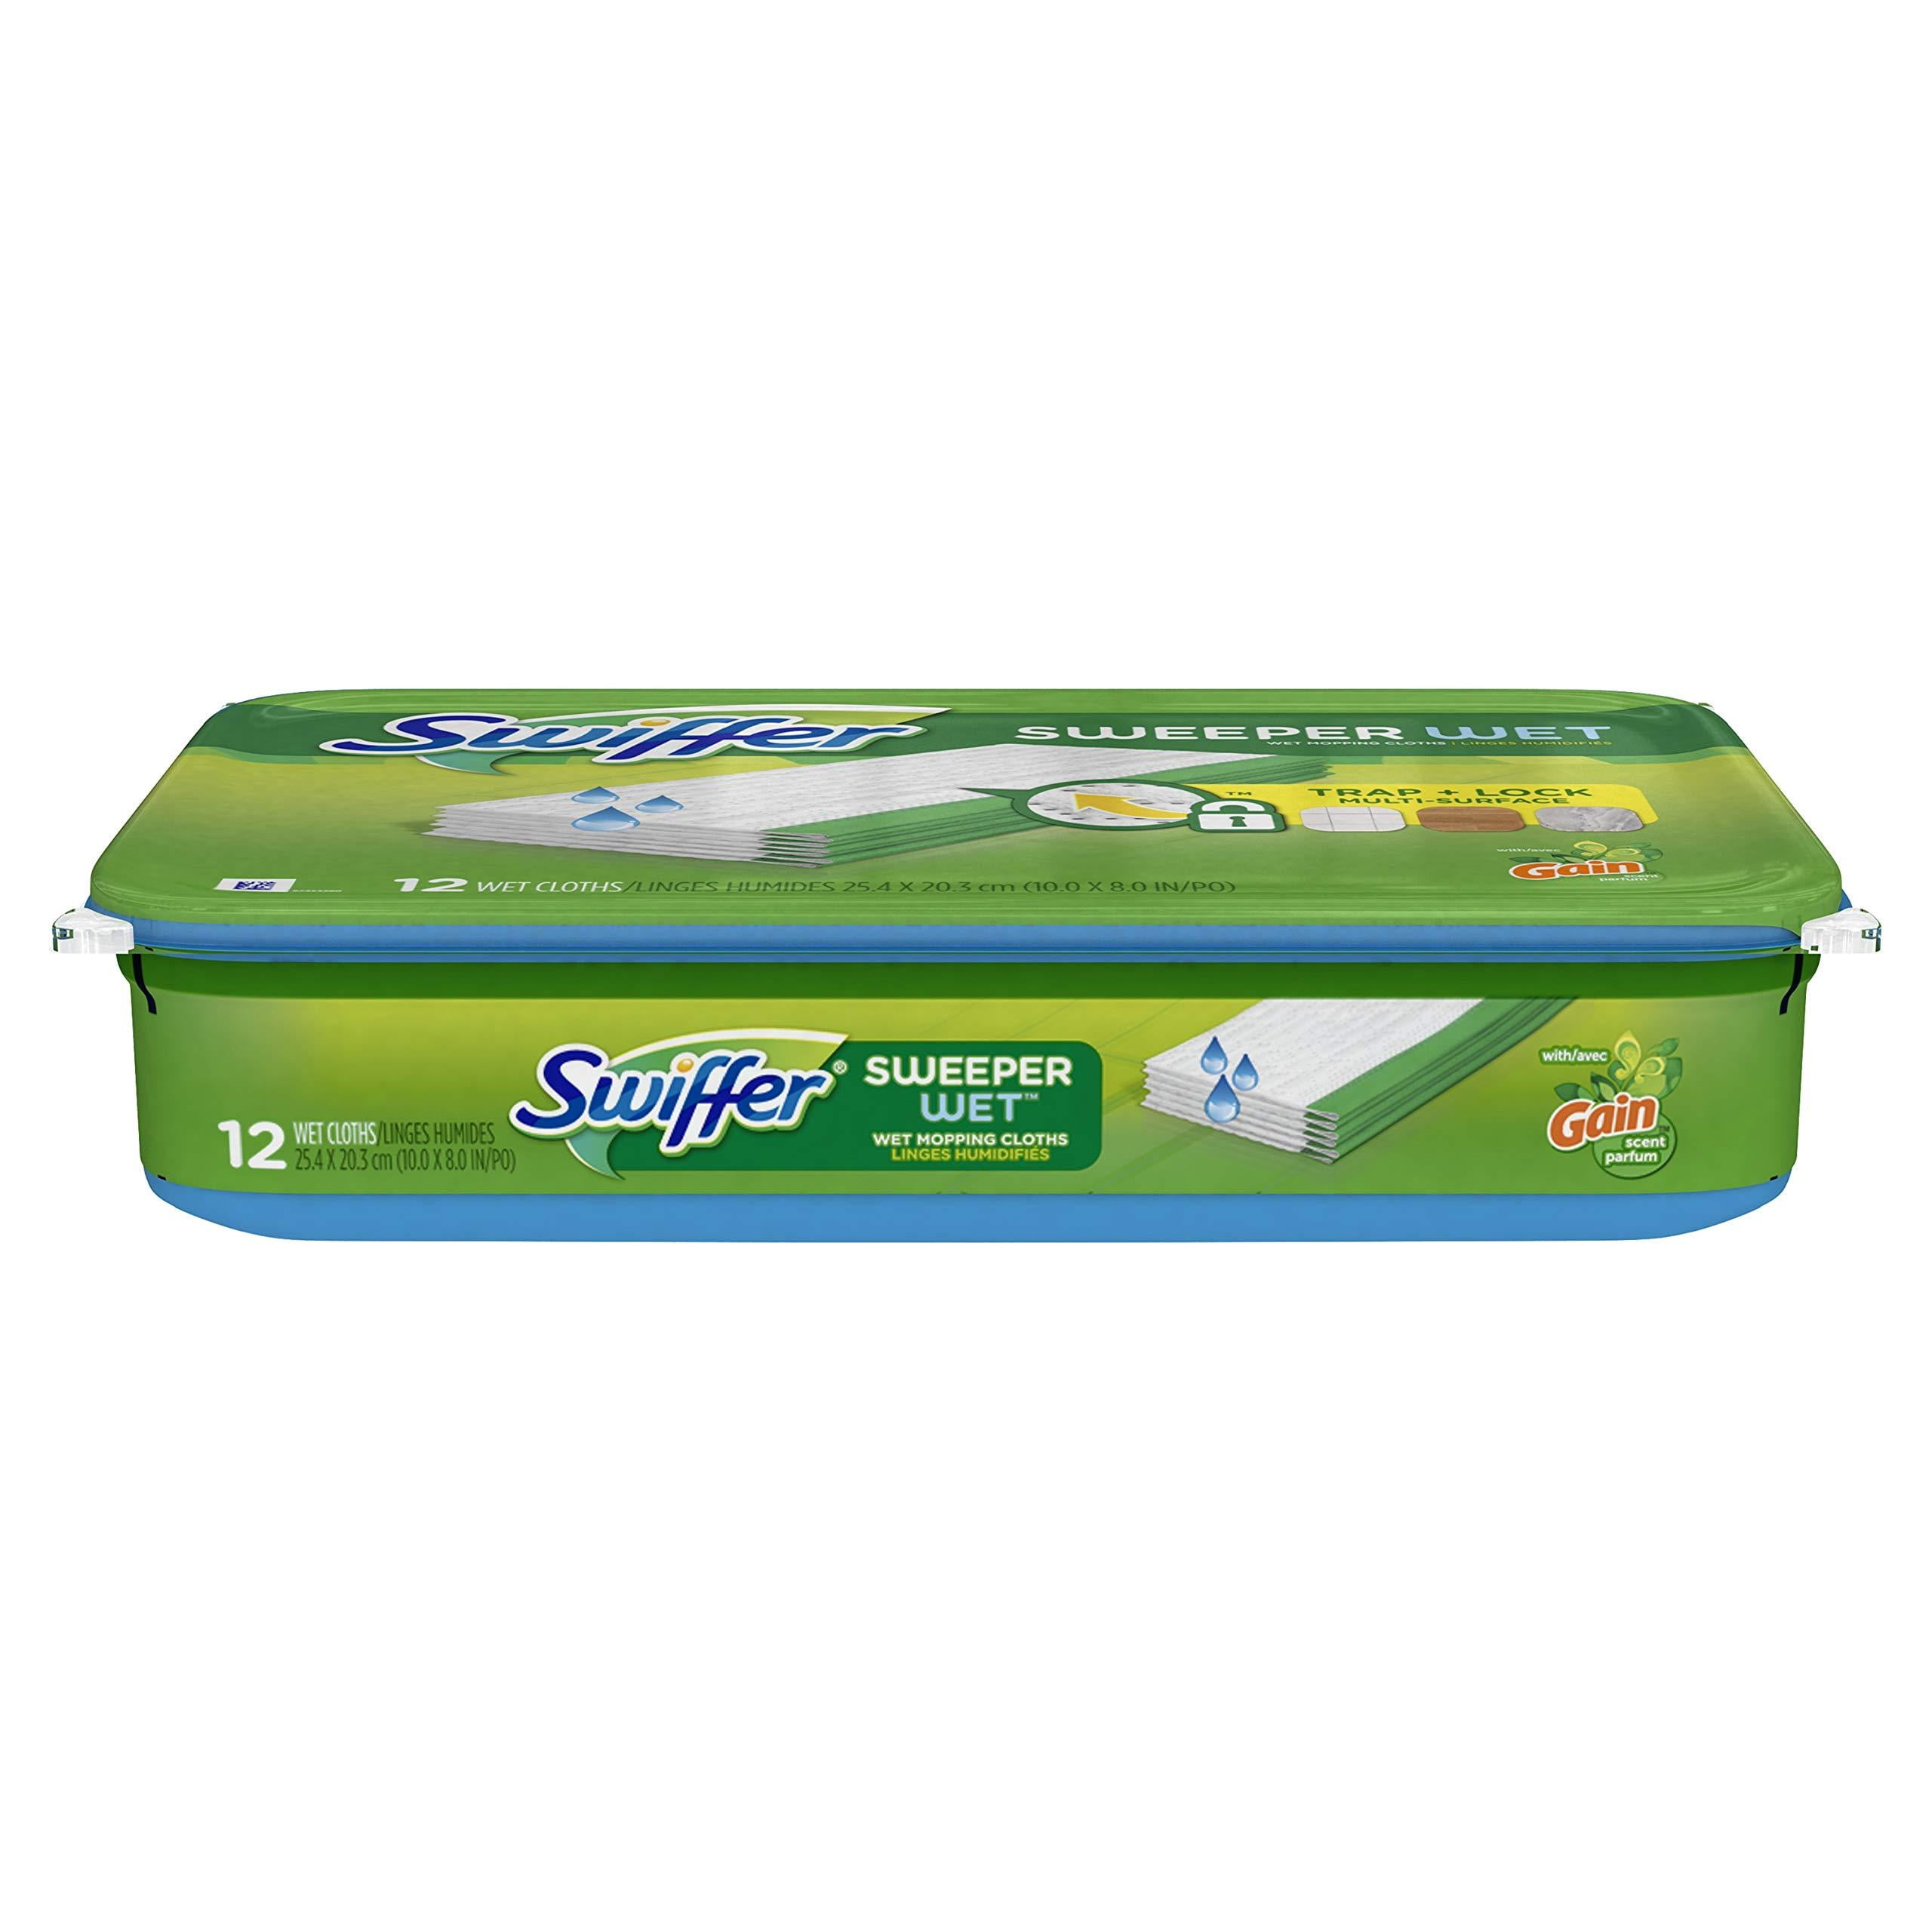 Swiffer Sweeper Wet Mopping Cloths, Multi-Surface Floor Cleaner